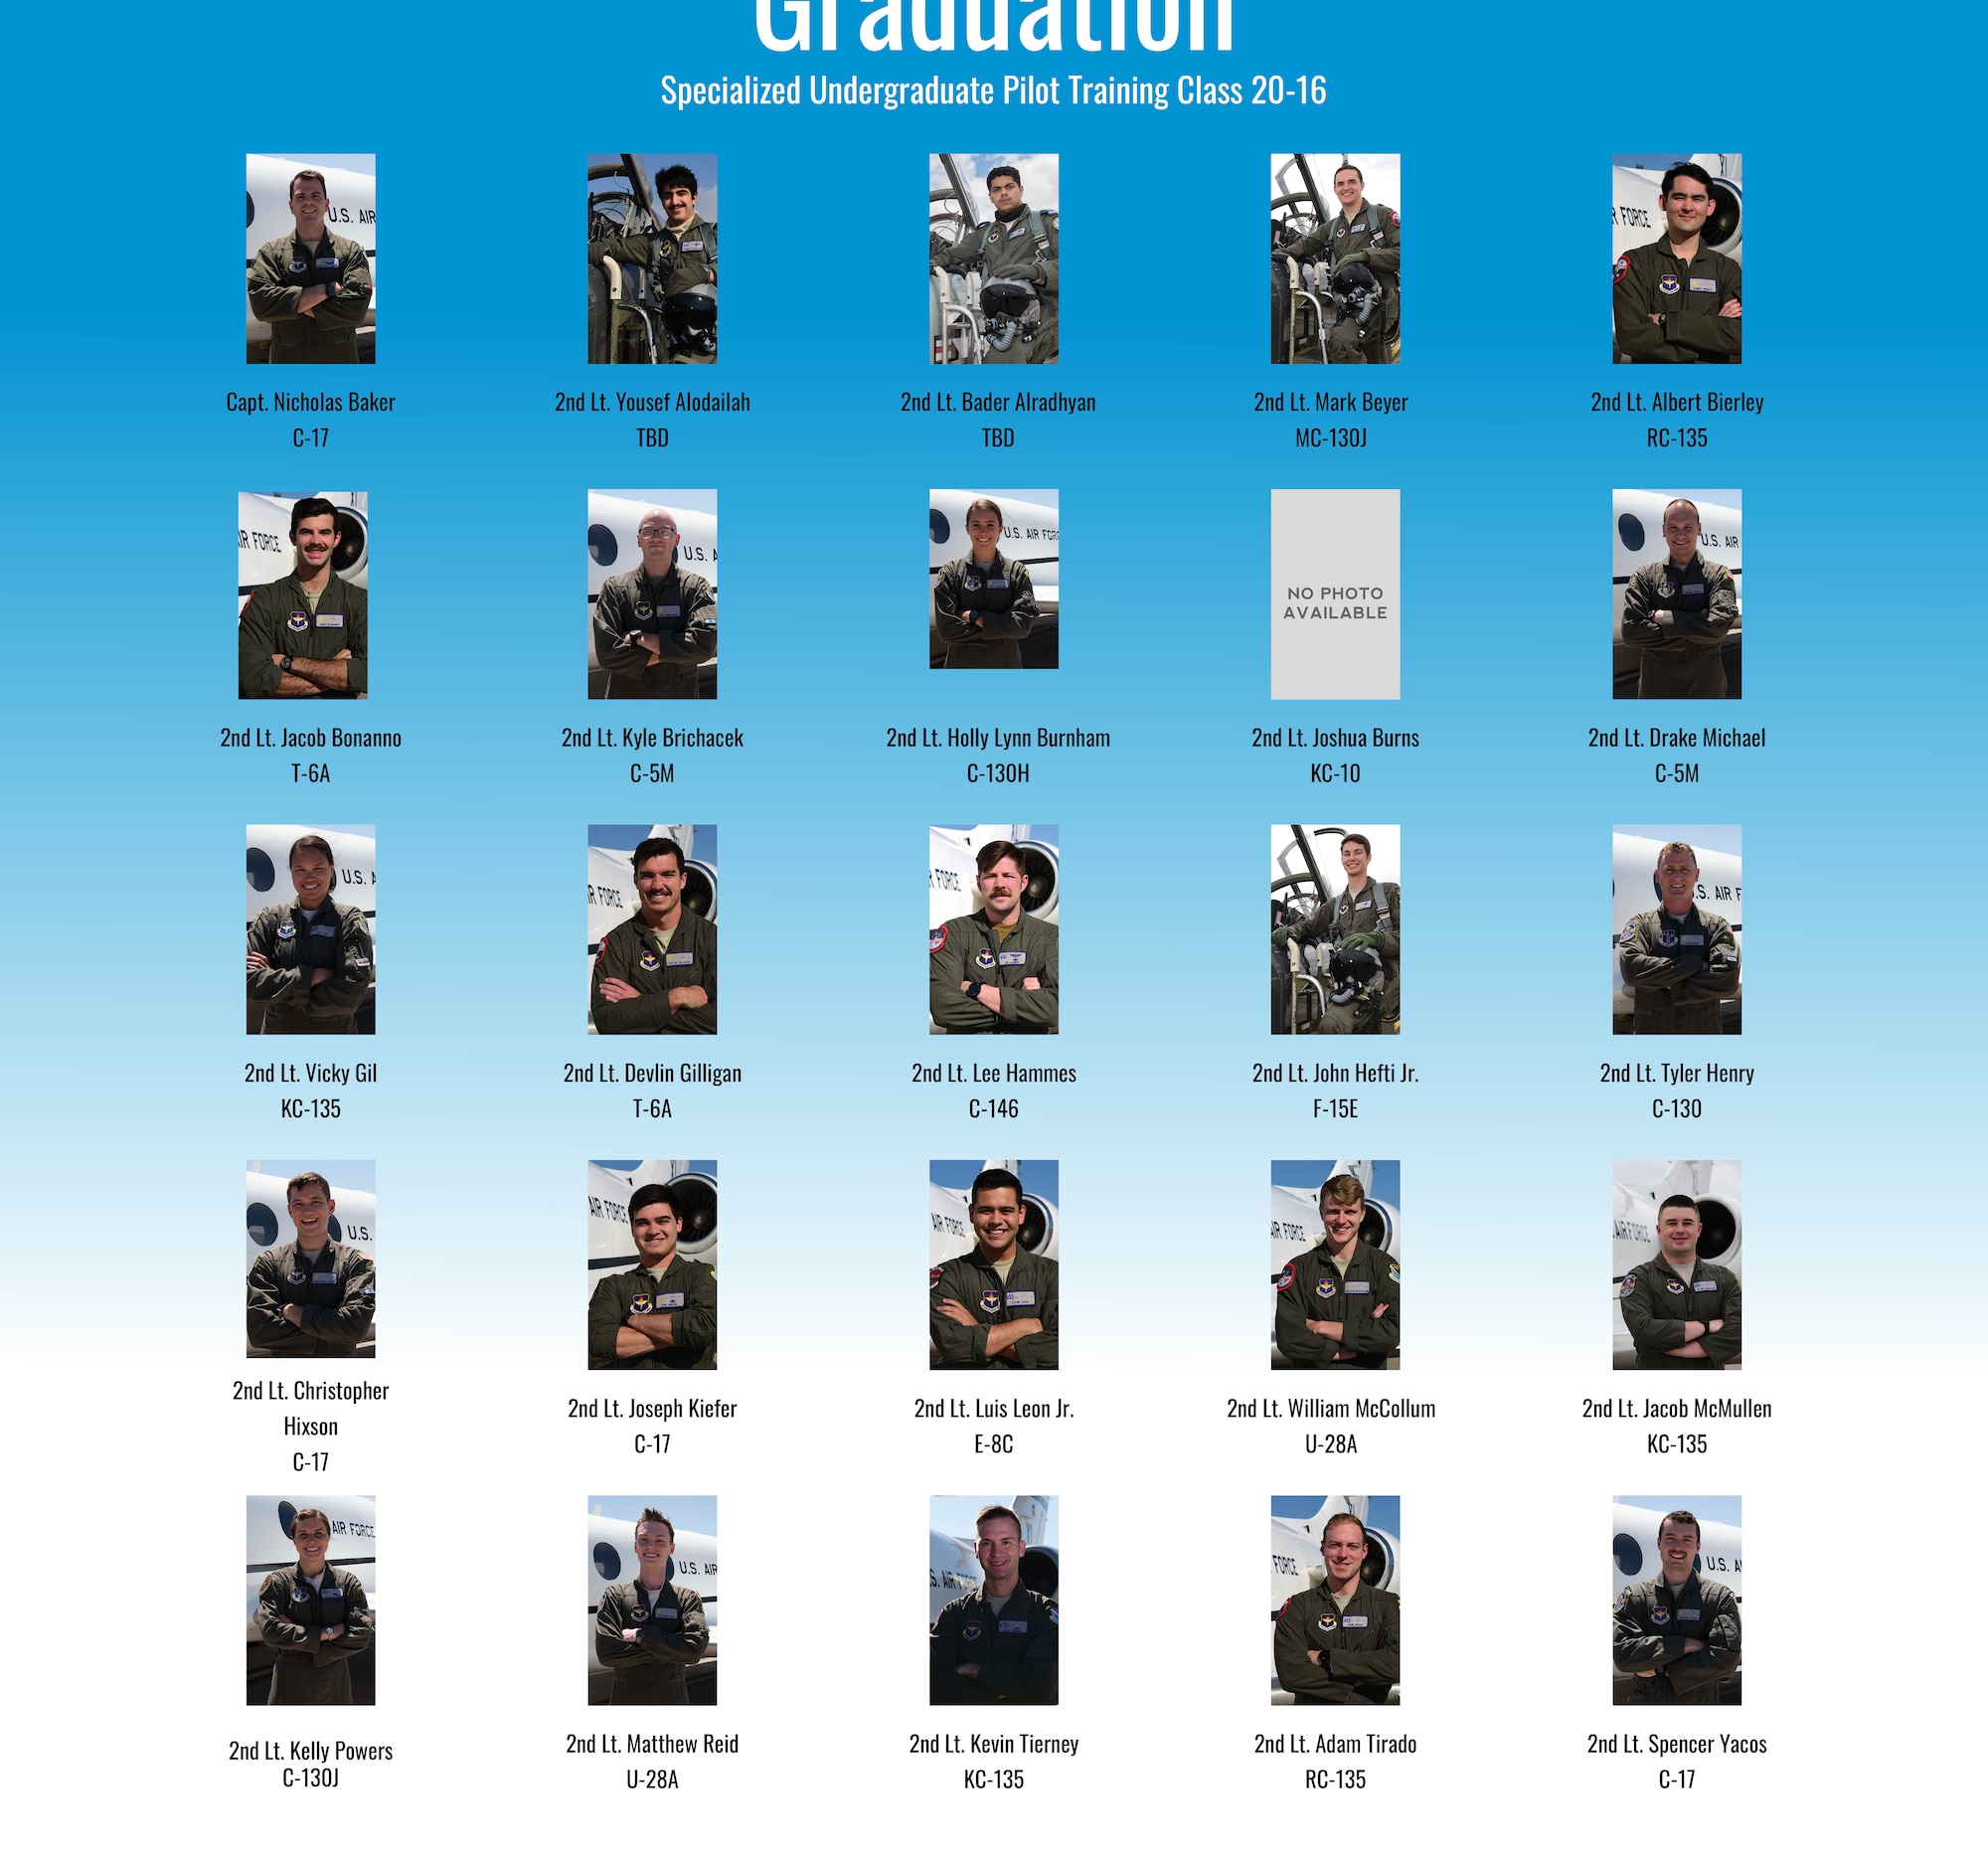 Specialized Undergraduate Pilot Training Class 20-16 is set to graduate after 52 weeks of training at Laughlin Air Force Base, Texas, June 12, 2020. Laughlin is the home of the 47th Flying Training Wing, whose mission is to build combat-ready Airmen, leaders and pilots. (U.S. Air Force graphic by Senior Airman Anne McCready)